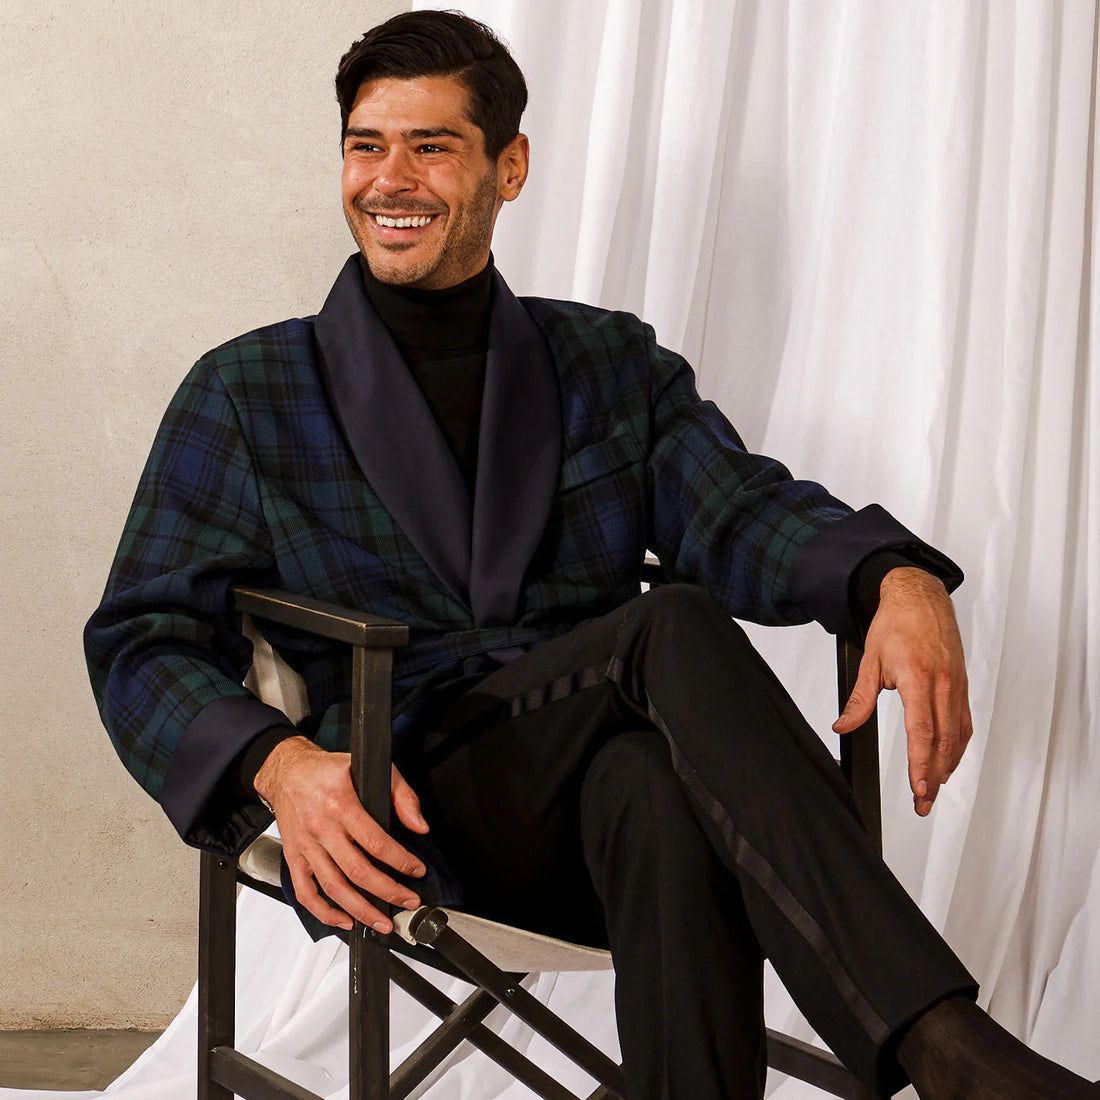 A smiling man in a tartan blazer and black turtleneck sits relaxed in a director's chair against a draped white background.